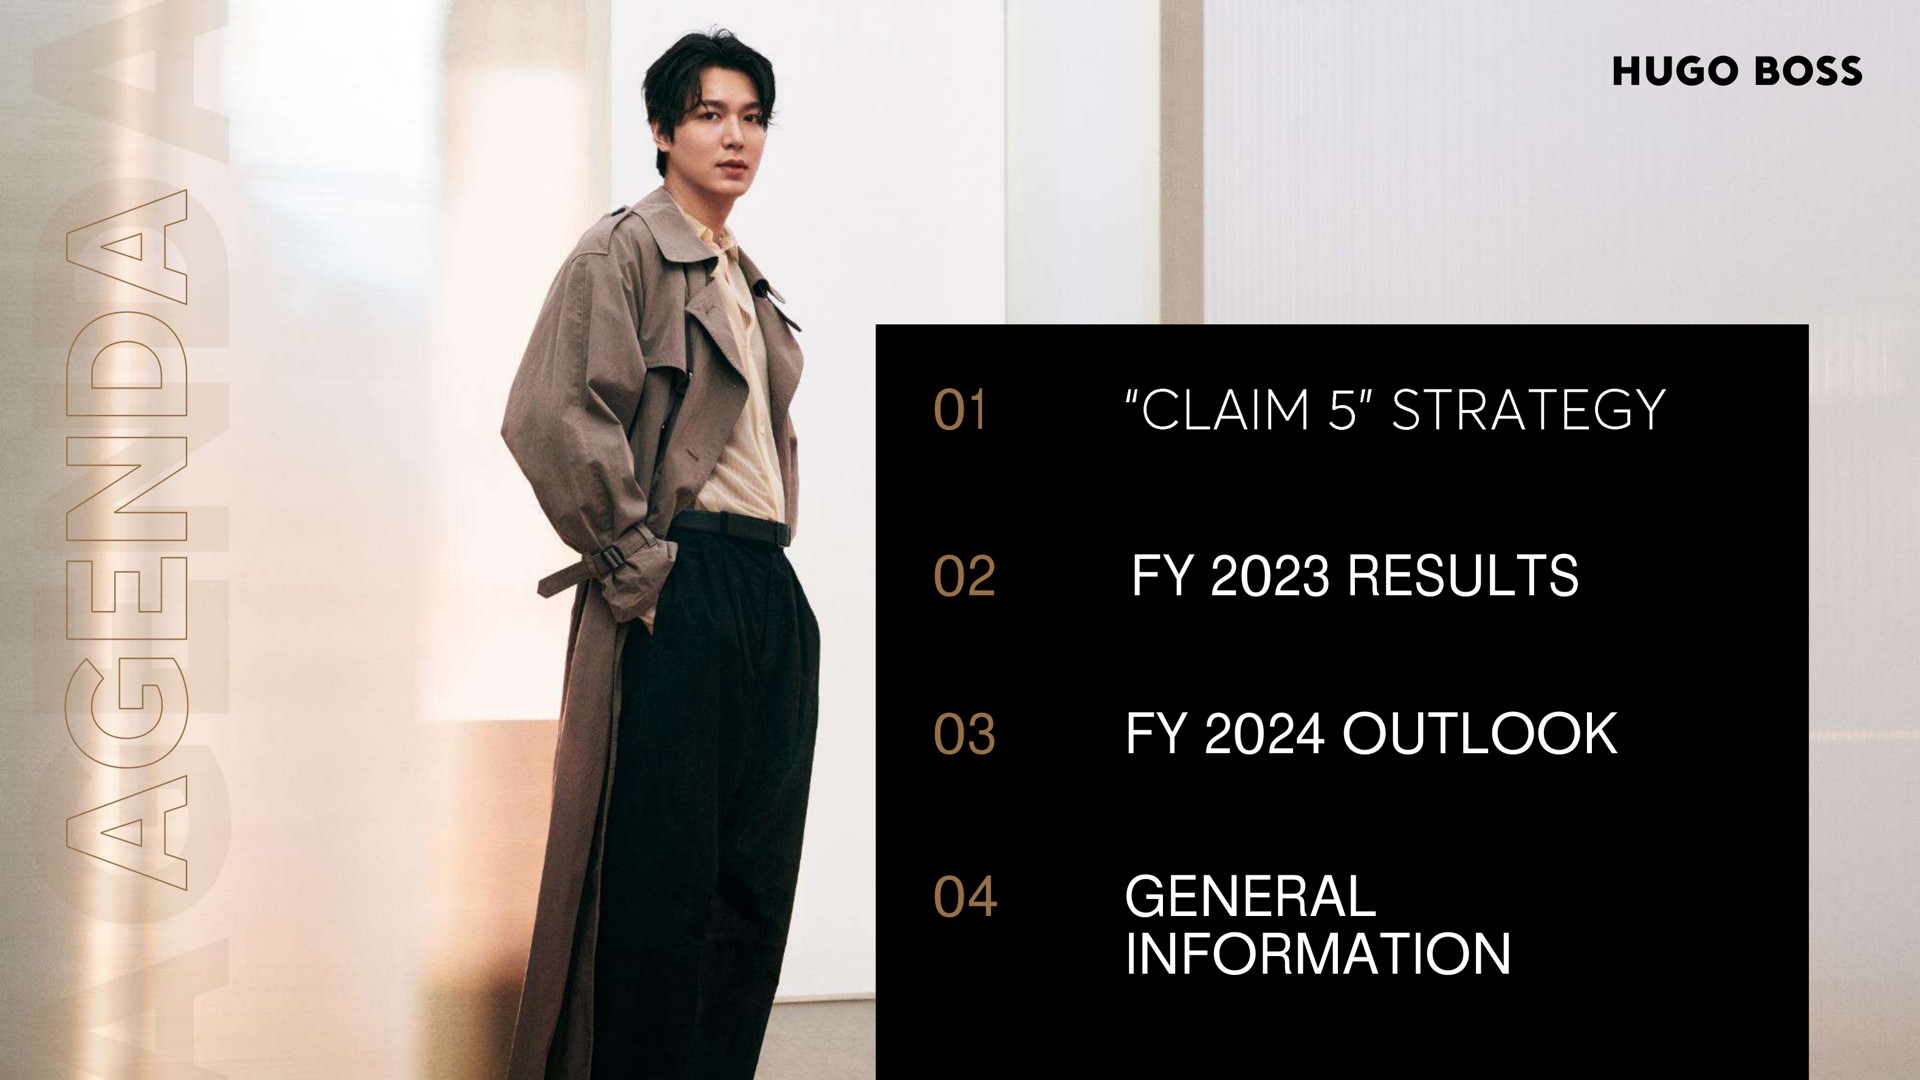 a a results outlook general information boss claim strategy | Hugo Boss